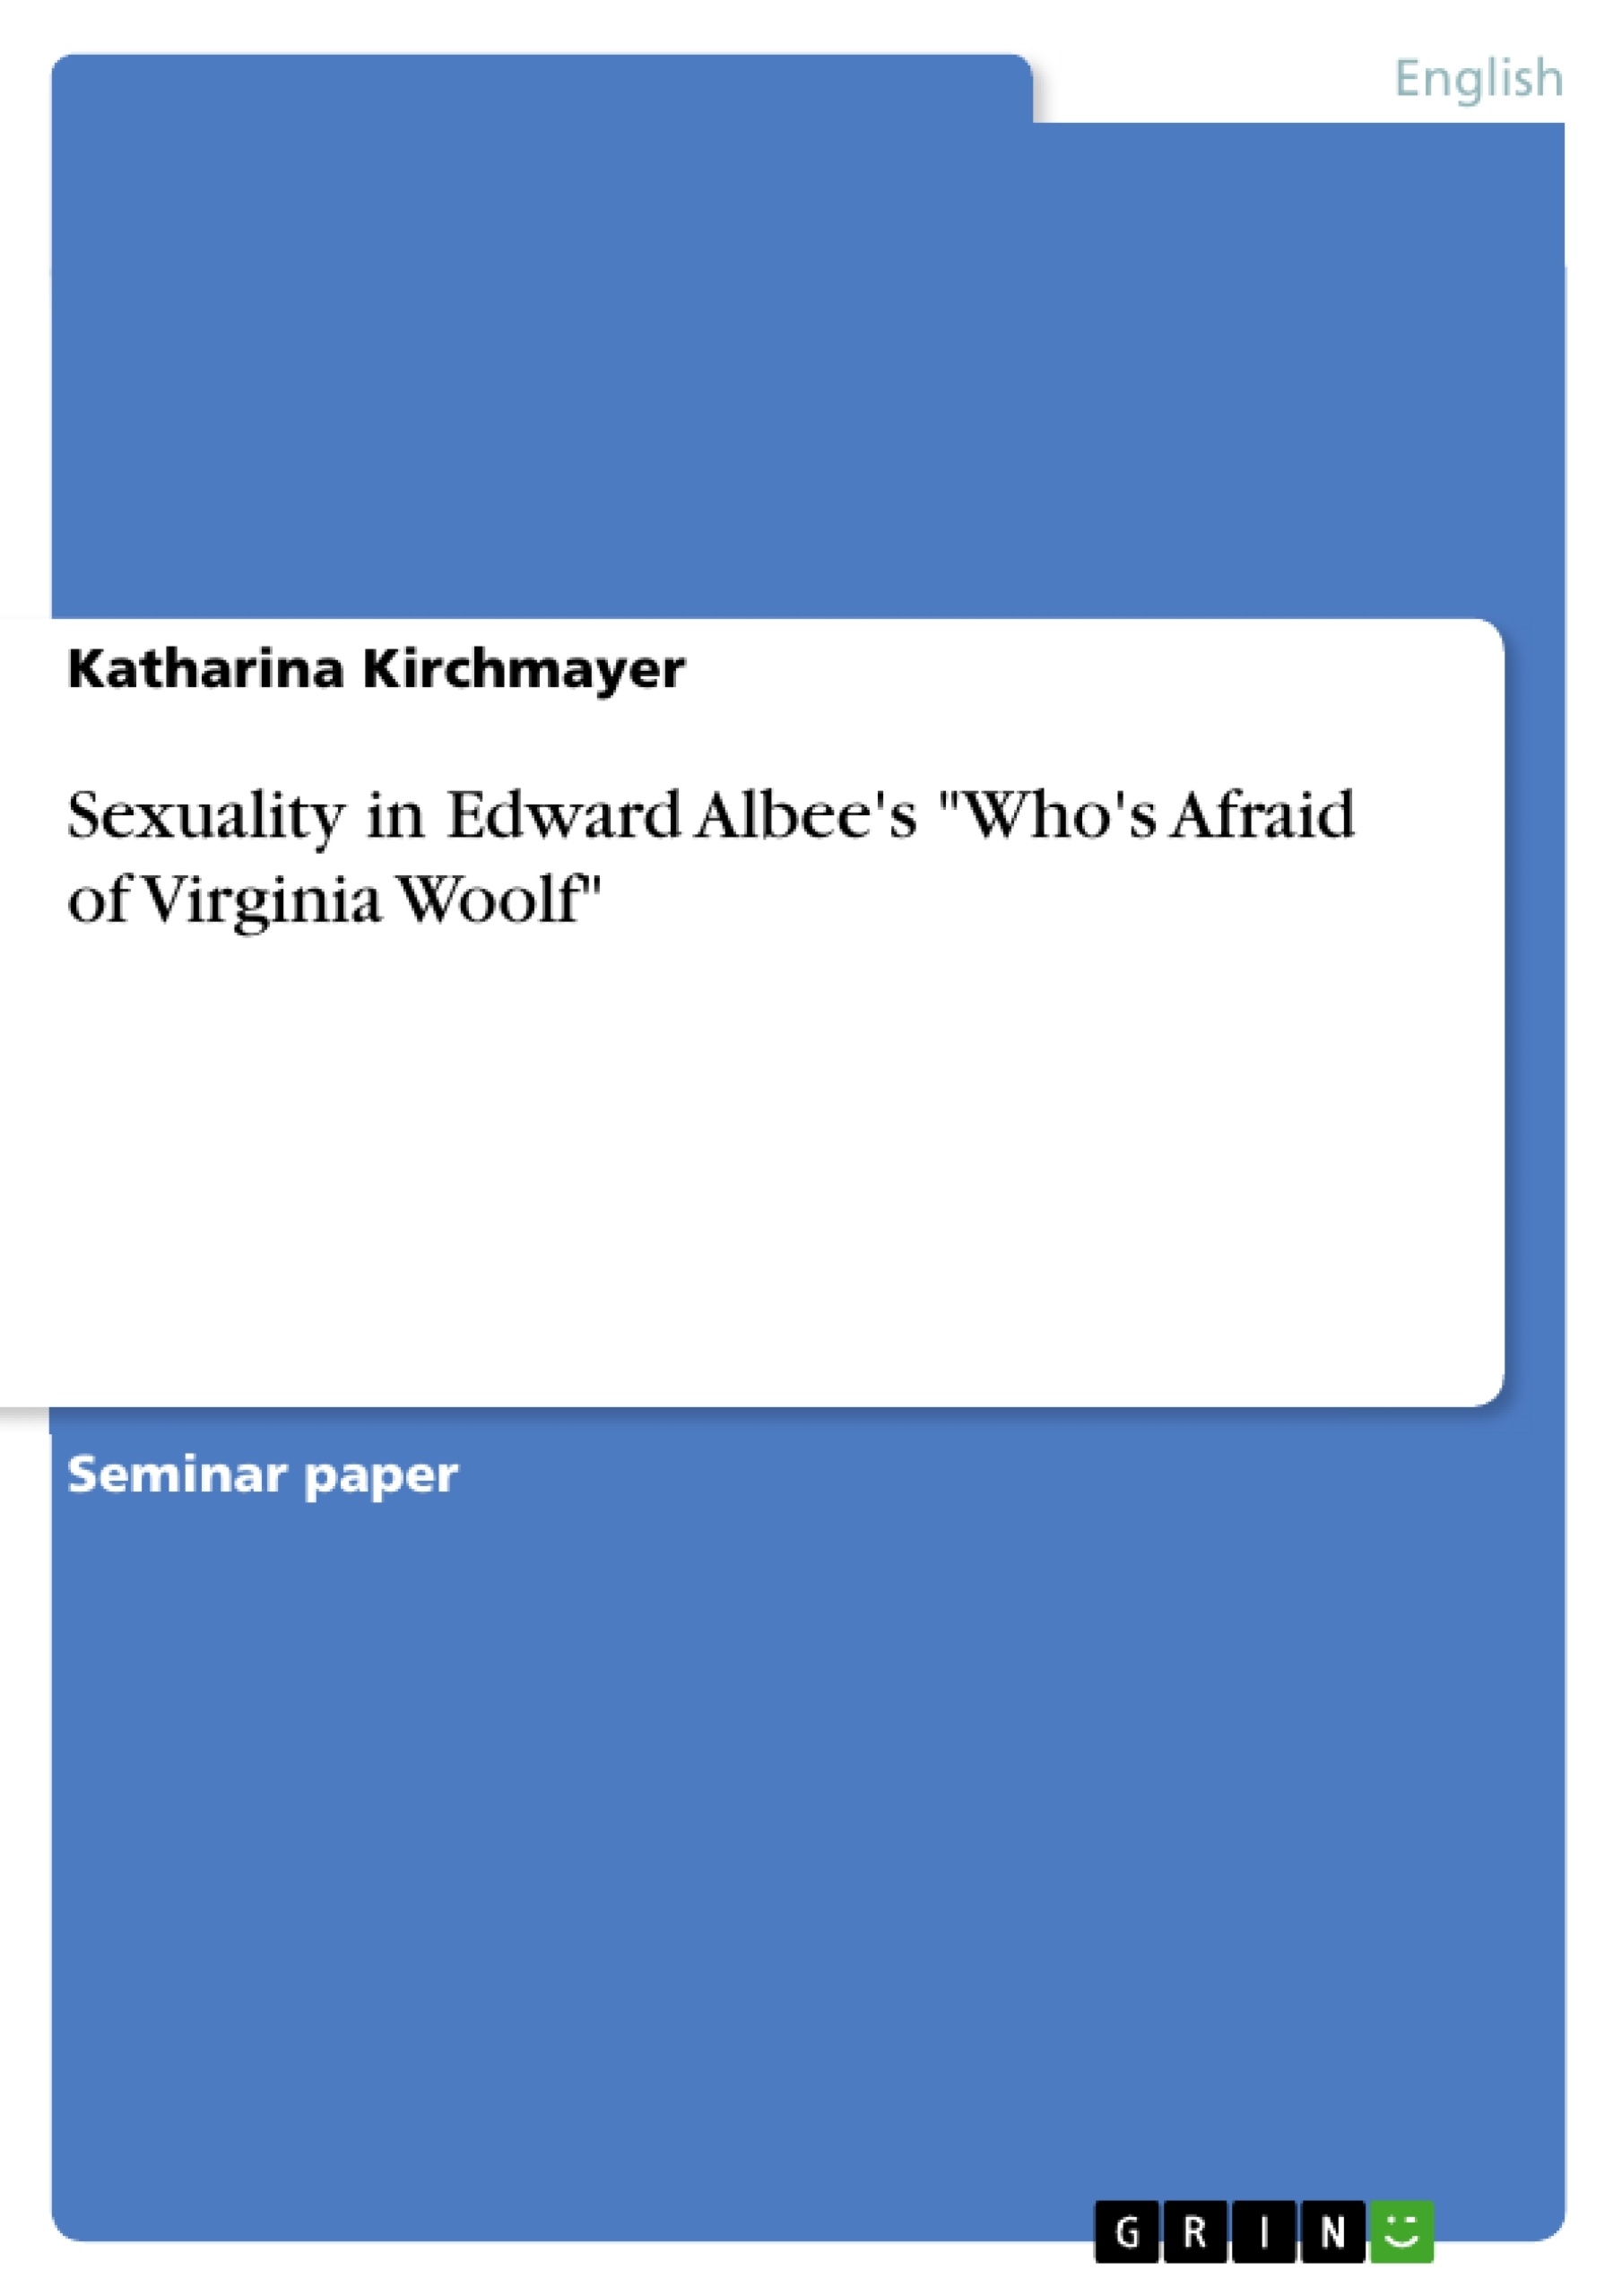 Title: Sexuality in Edward Albee's "Who's Afraid of Virginia Woolf"